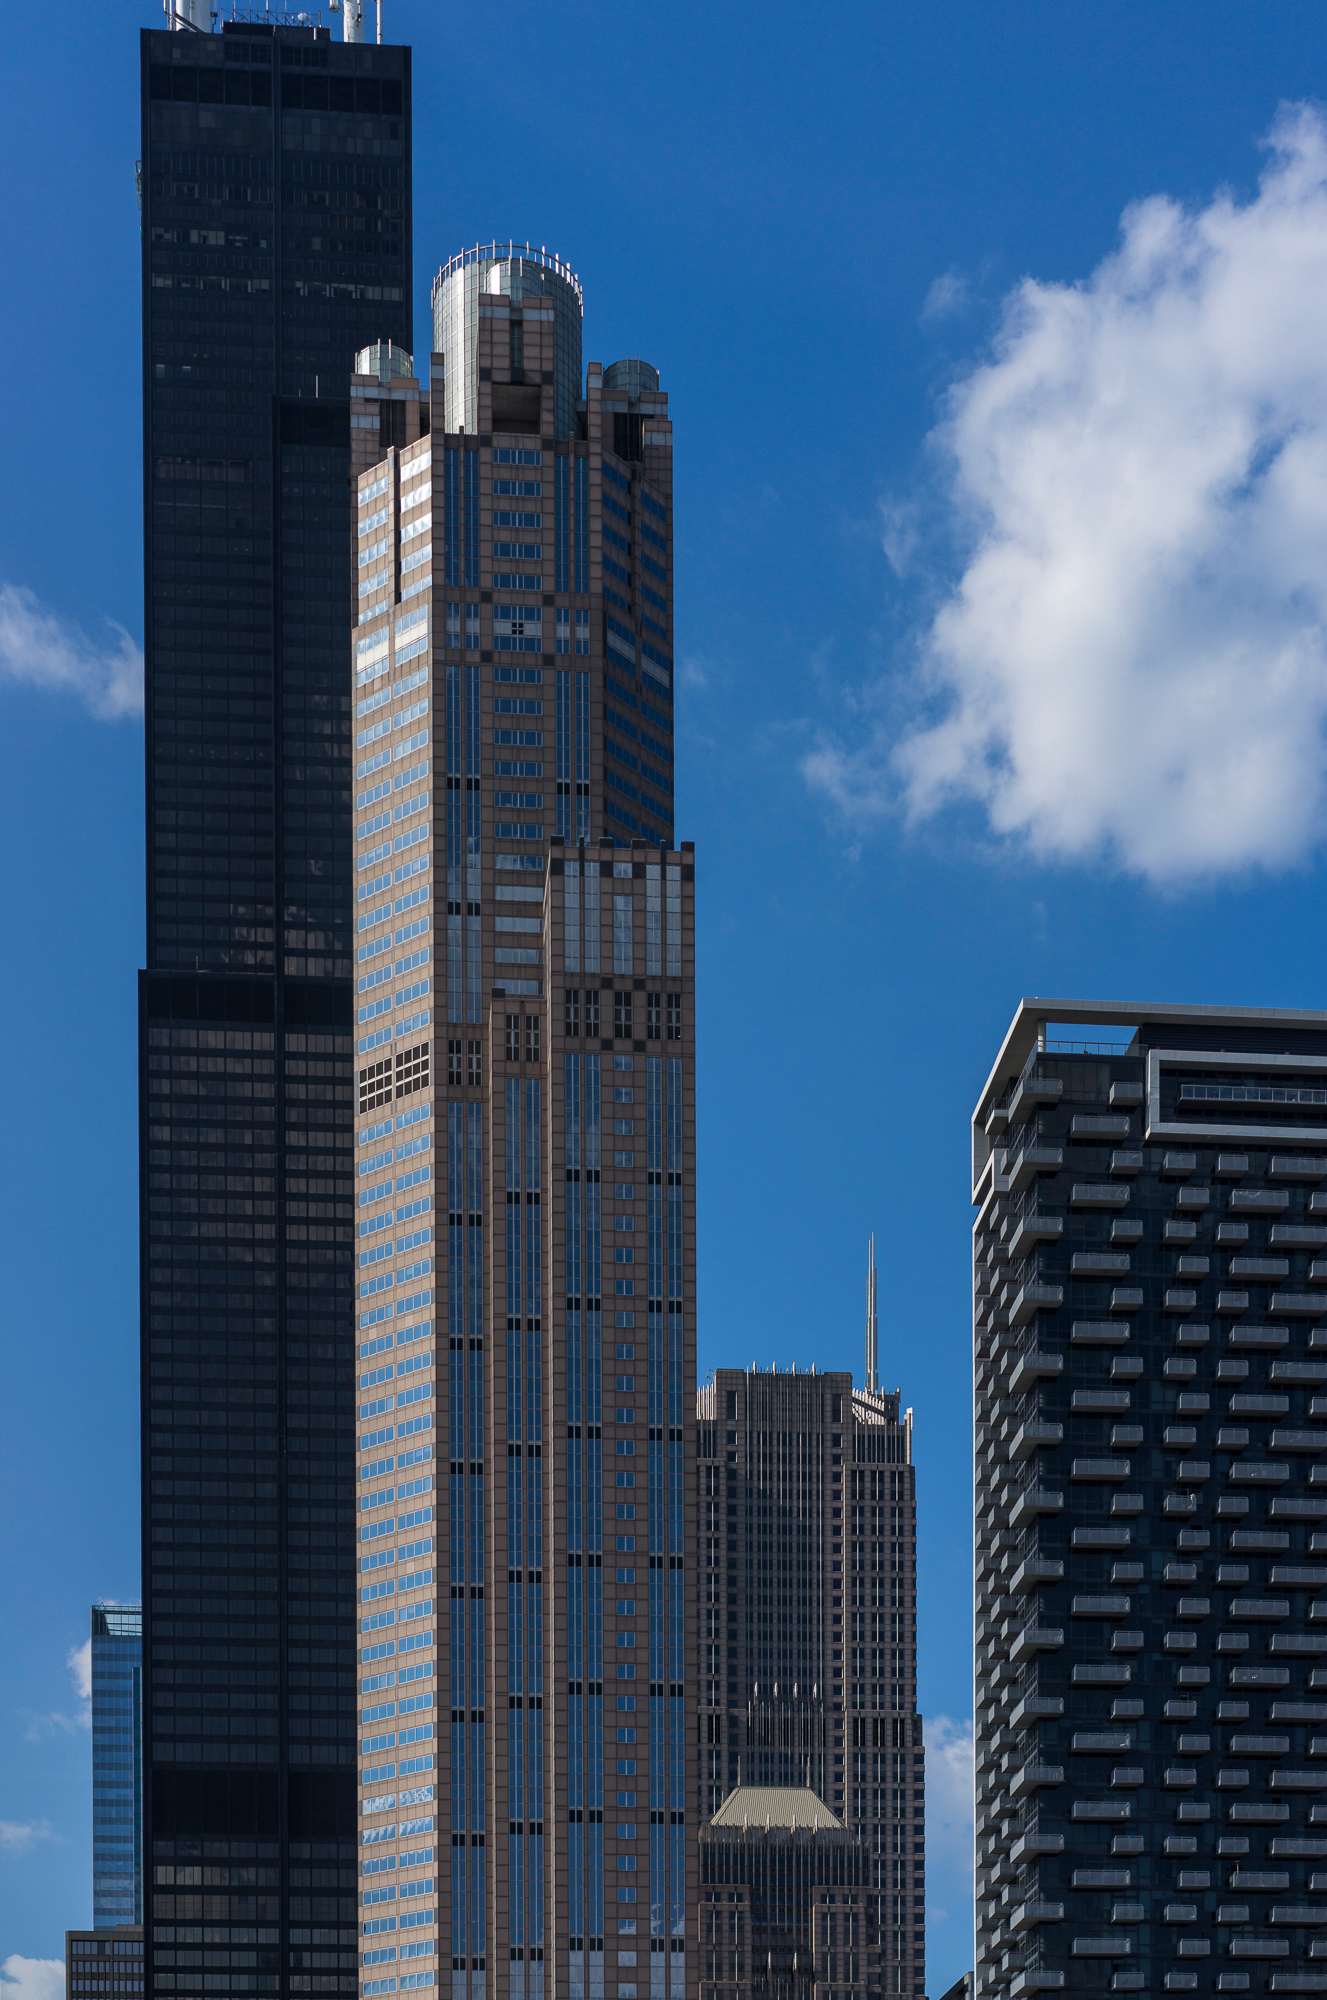 Chicago skyline features some of the world’s tallest buildings